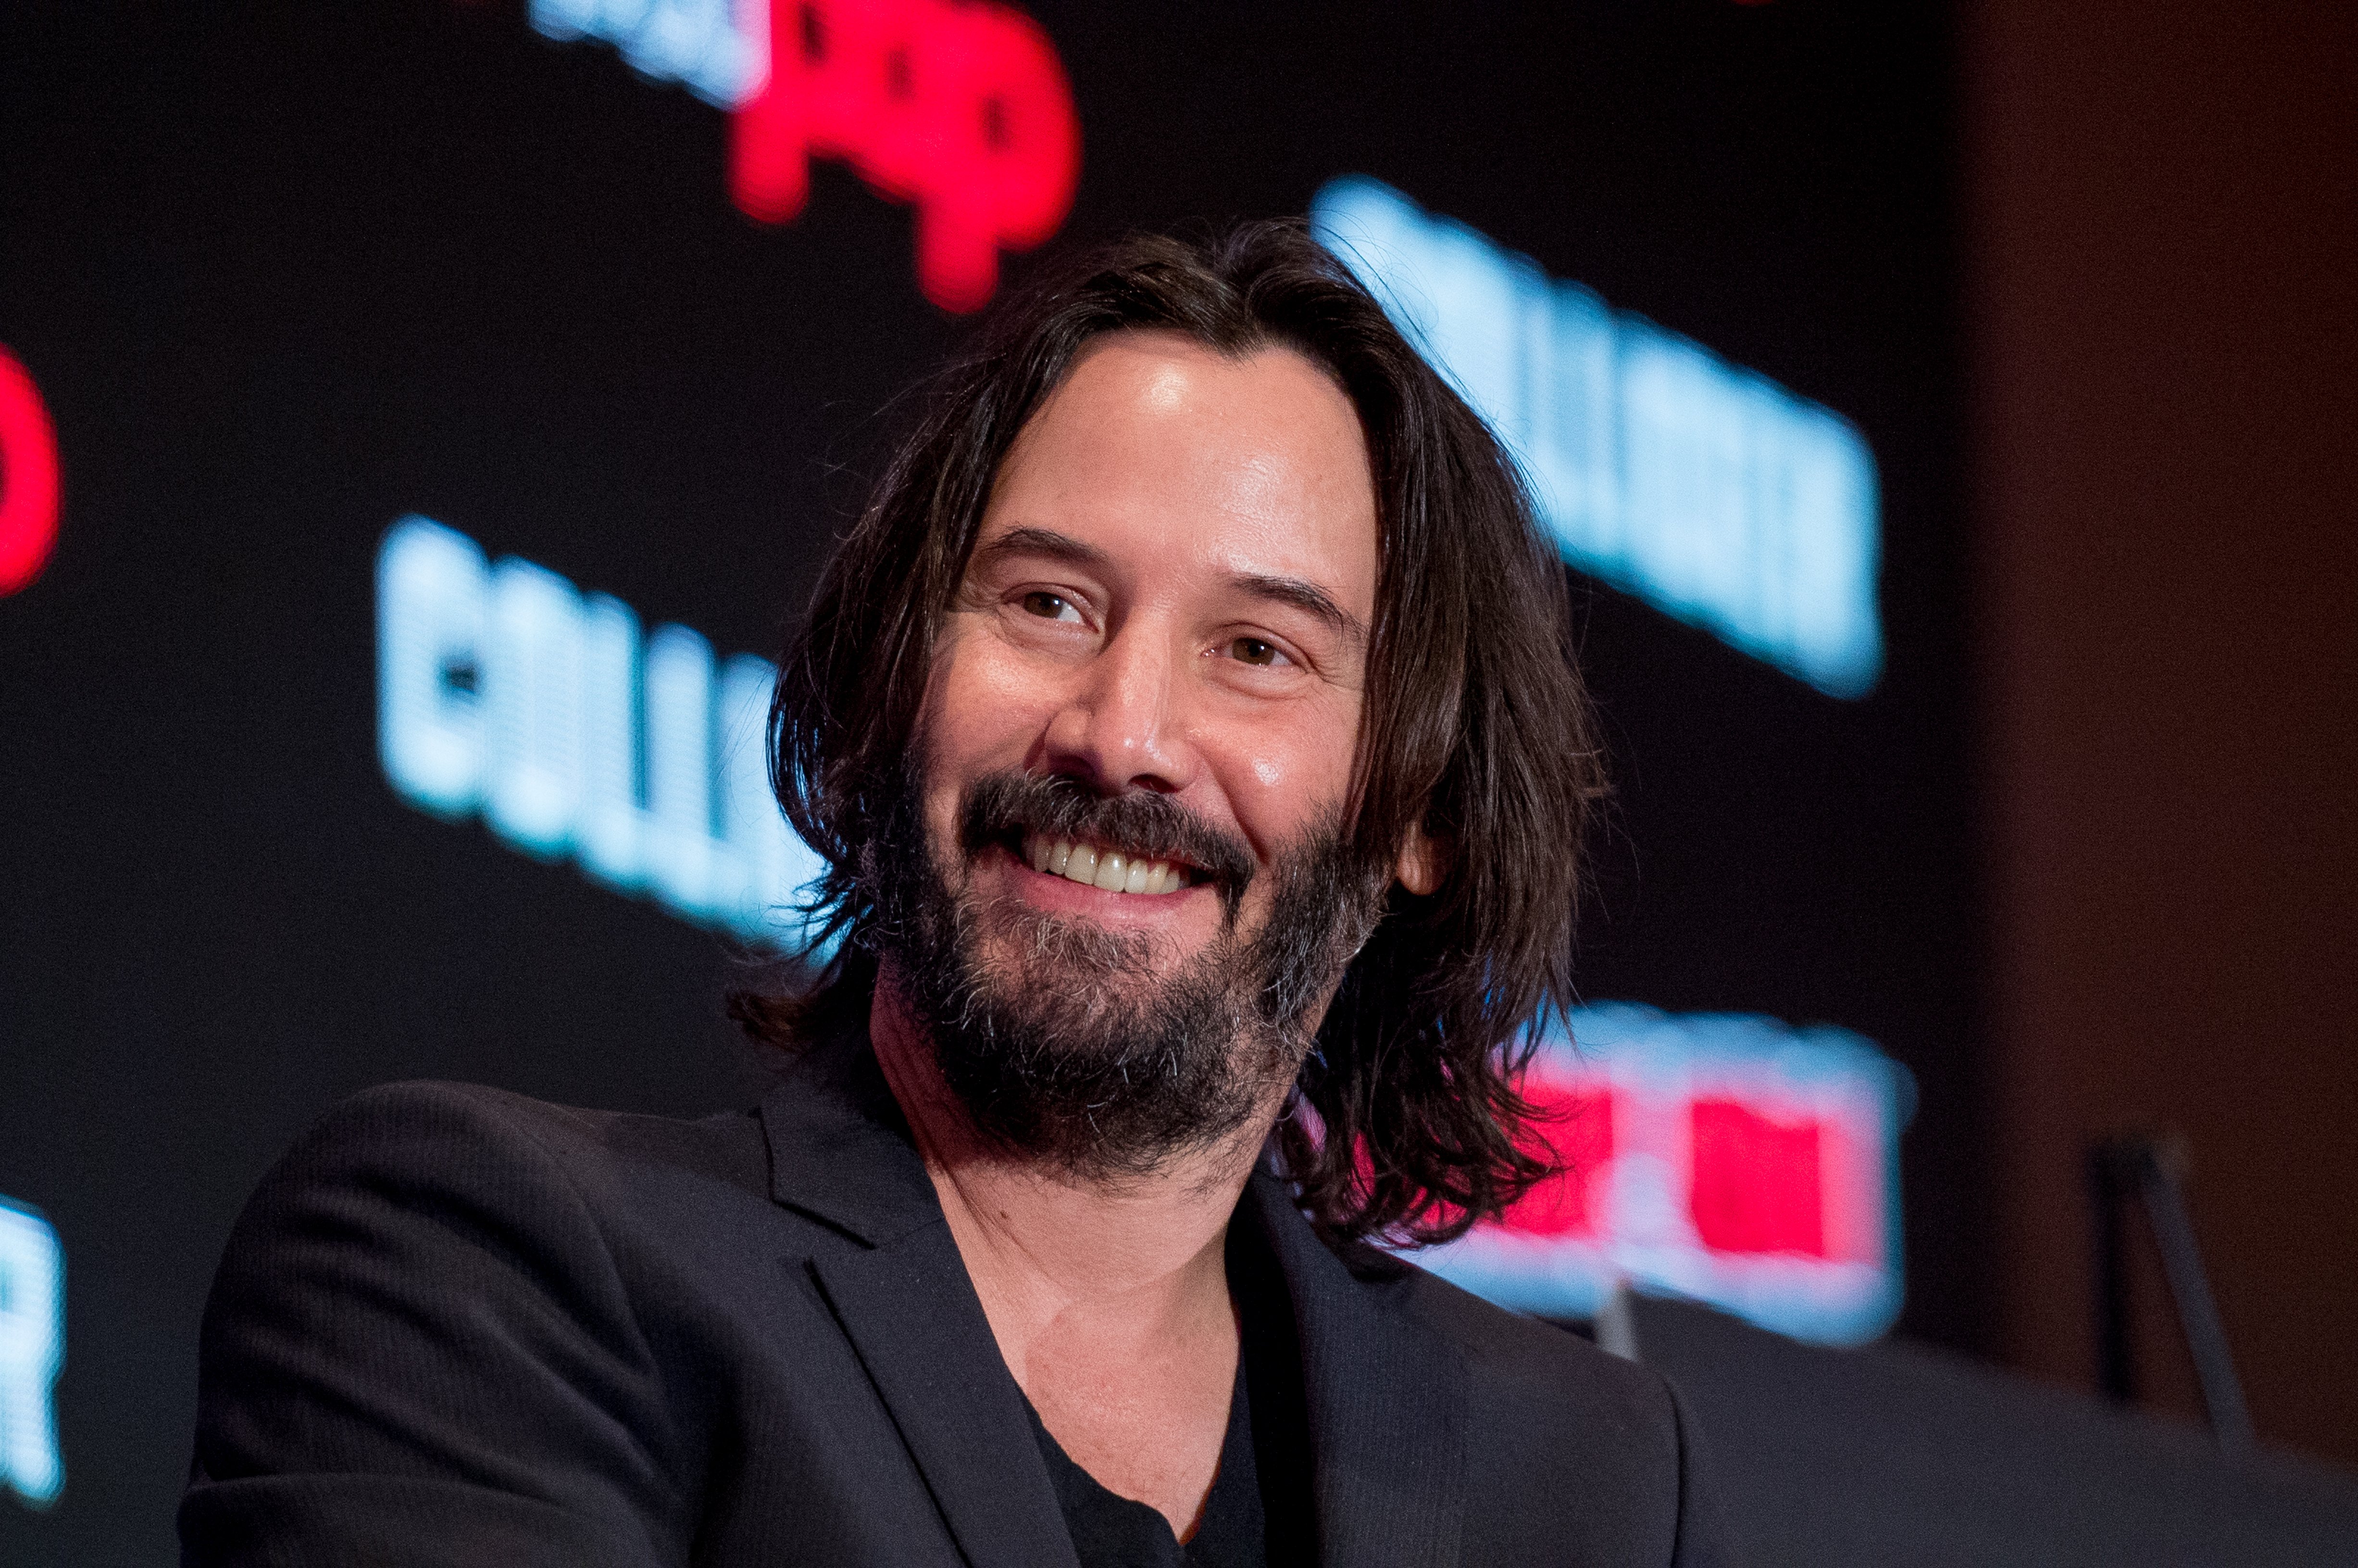 Keanu Reeves discusses "Replicas" on October 5, 2017, in New York City. | Source: Getty Images.